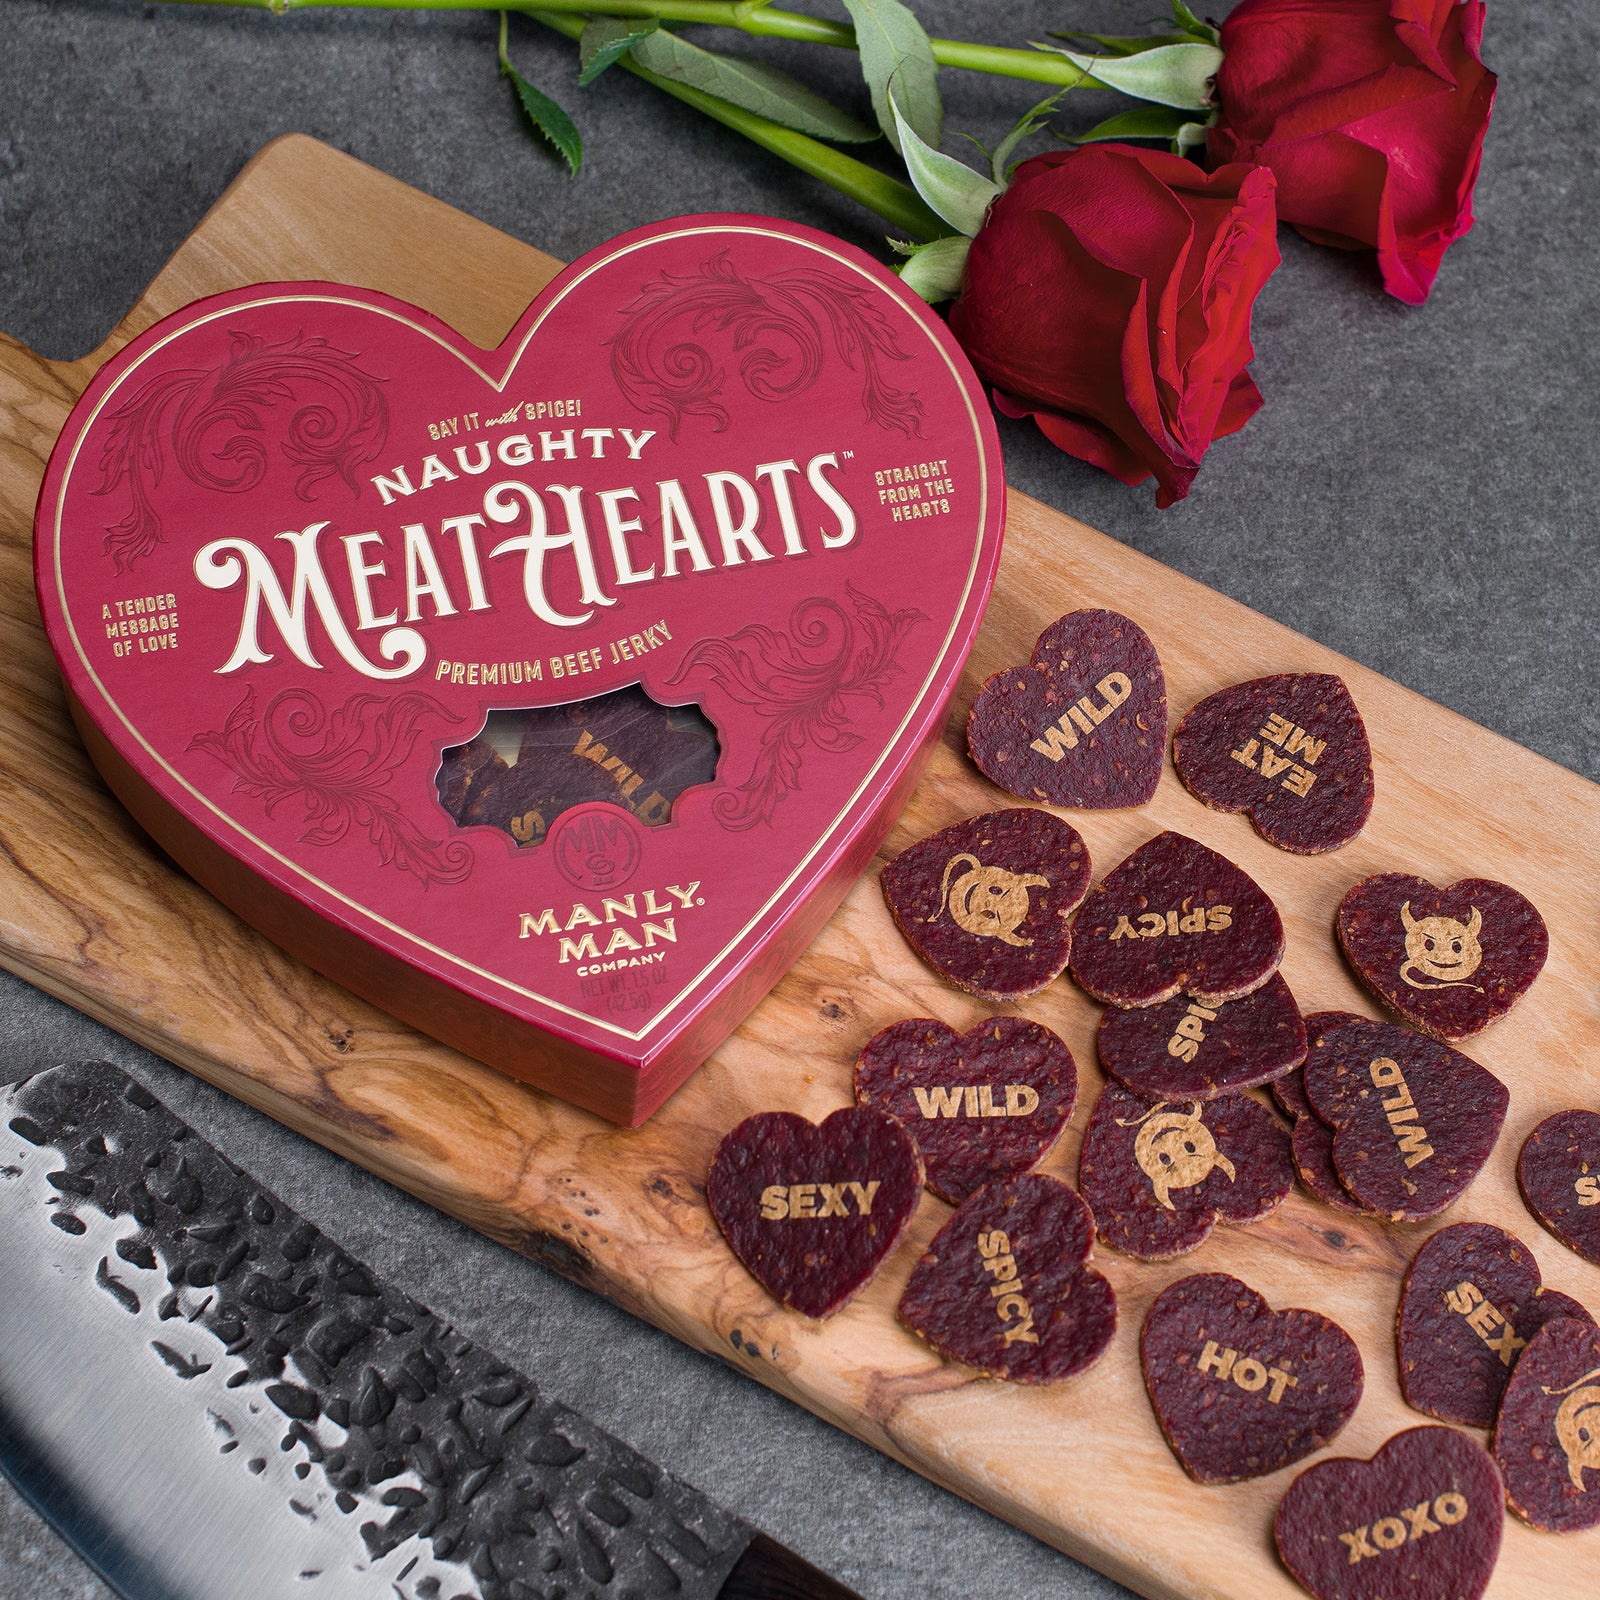 Manly Valentine's Day Gifts for Men // Manly Man Co® - Manly Man Co.